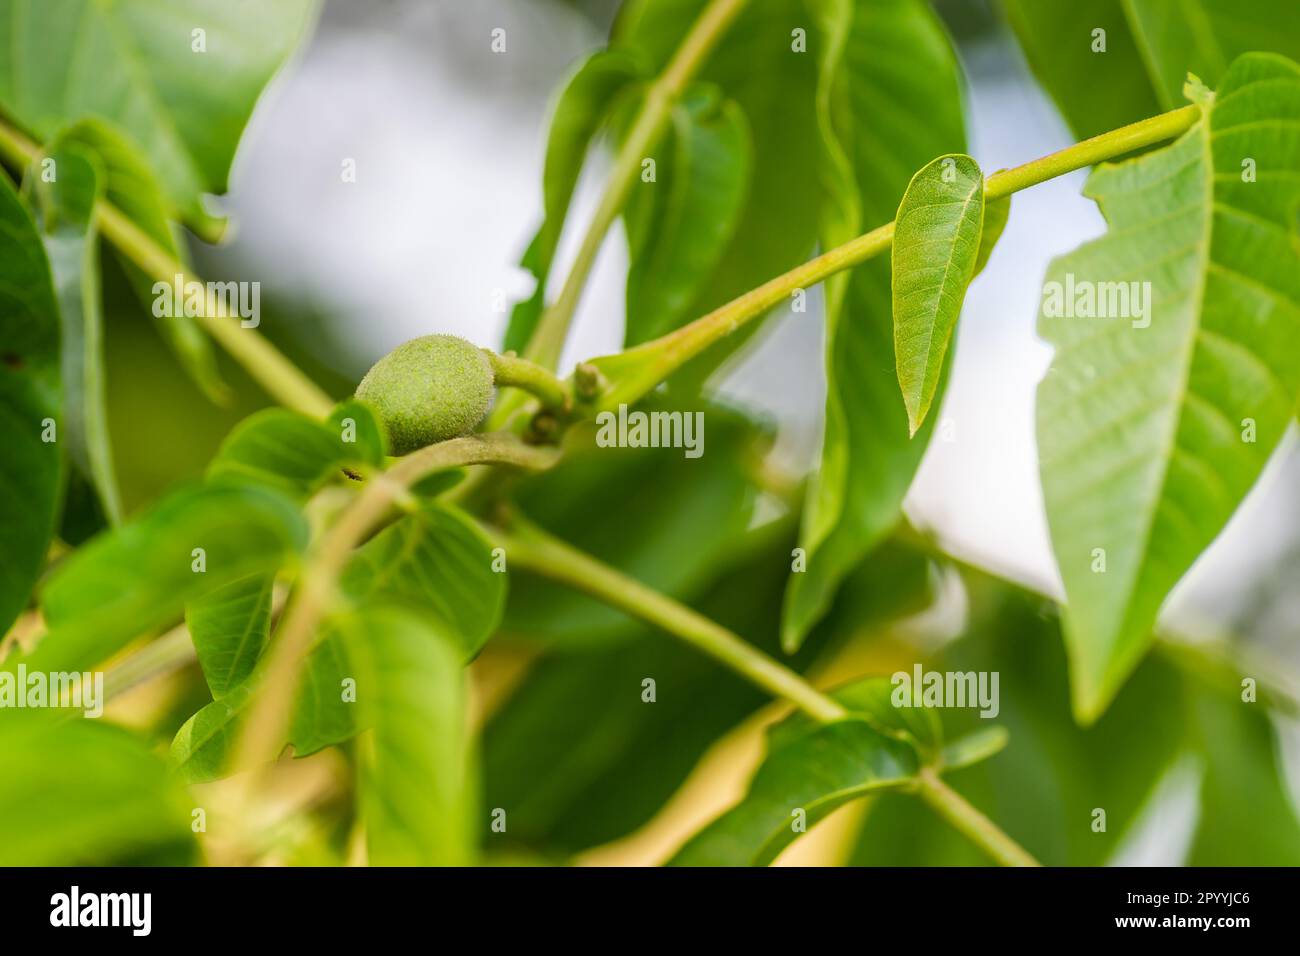 Close-up shot of fresh green young walnut fruits on a branch in the crown of the tree. Stock Photo